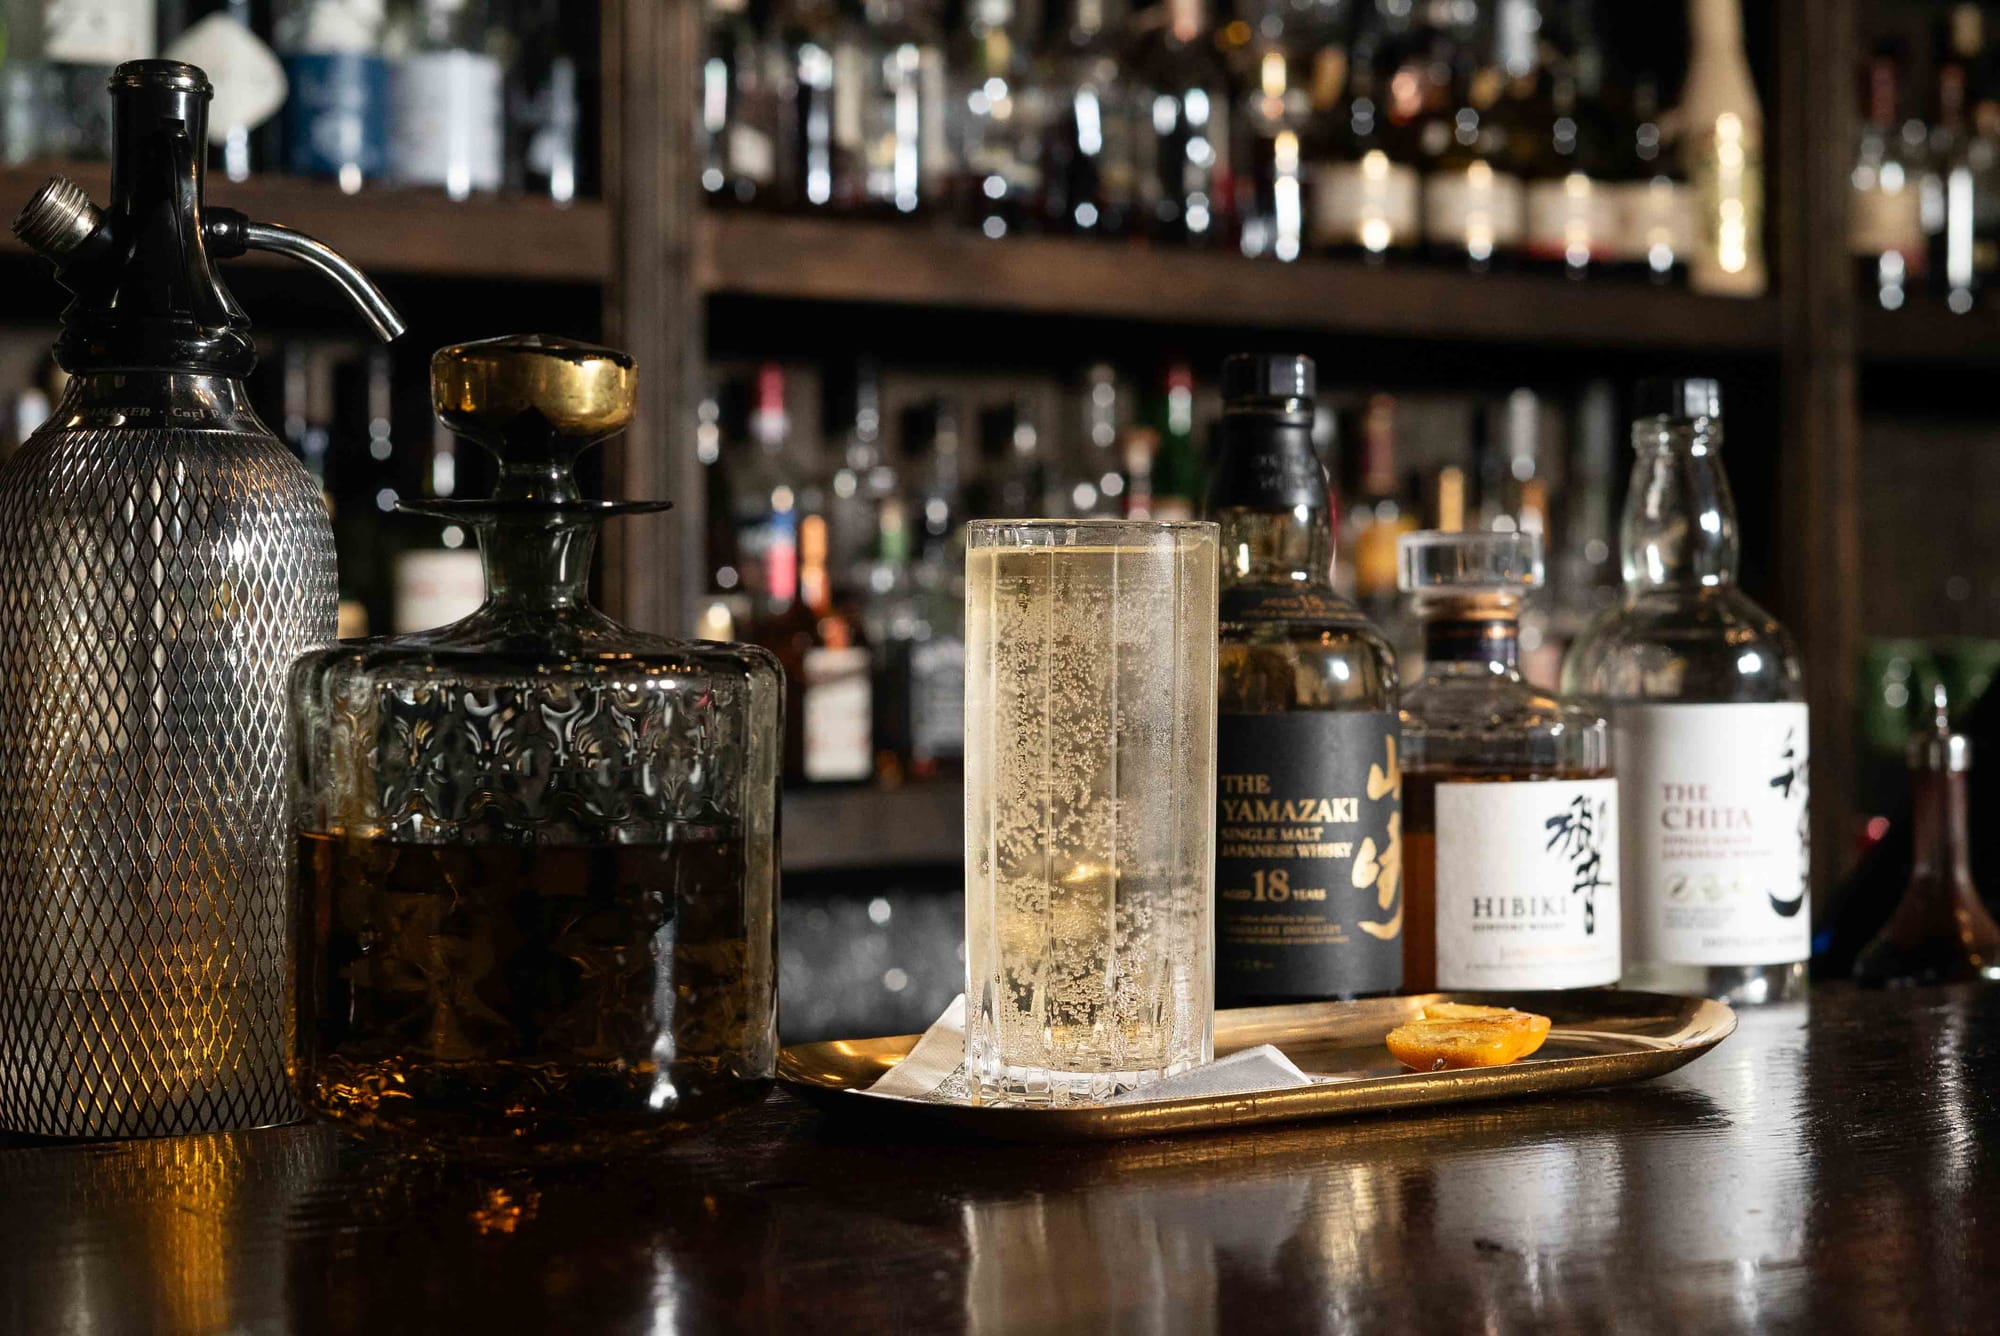 The Baller Highball at Old Mate's Place in Sydney. Photo: Boothby